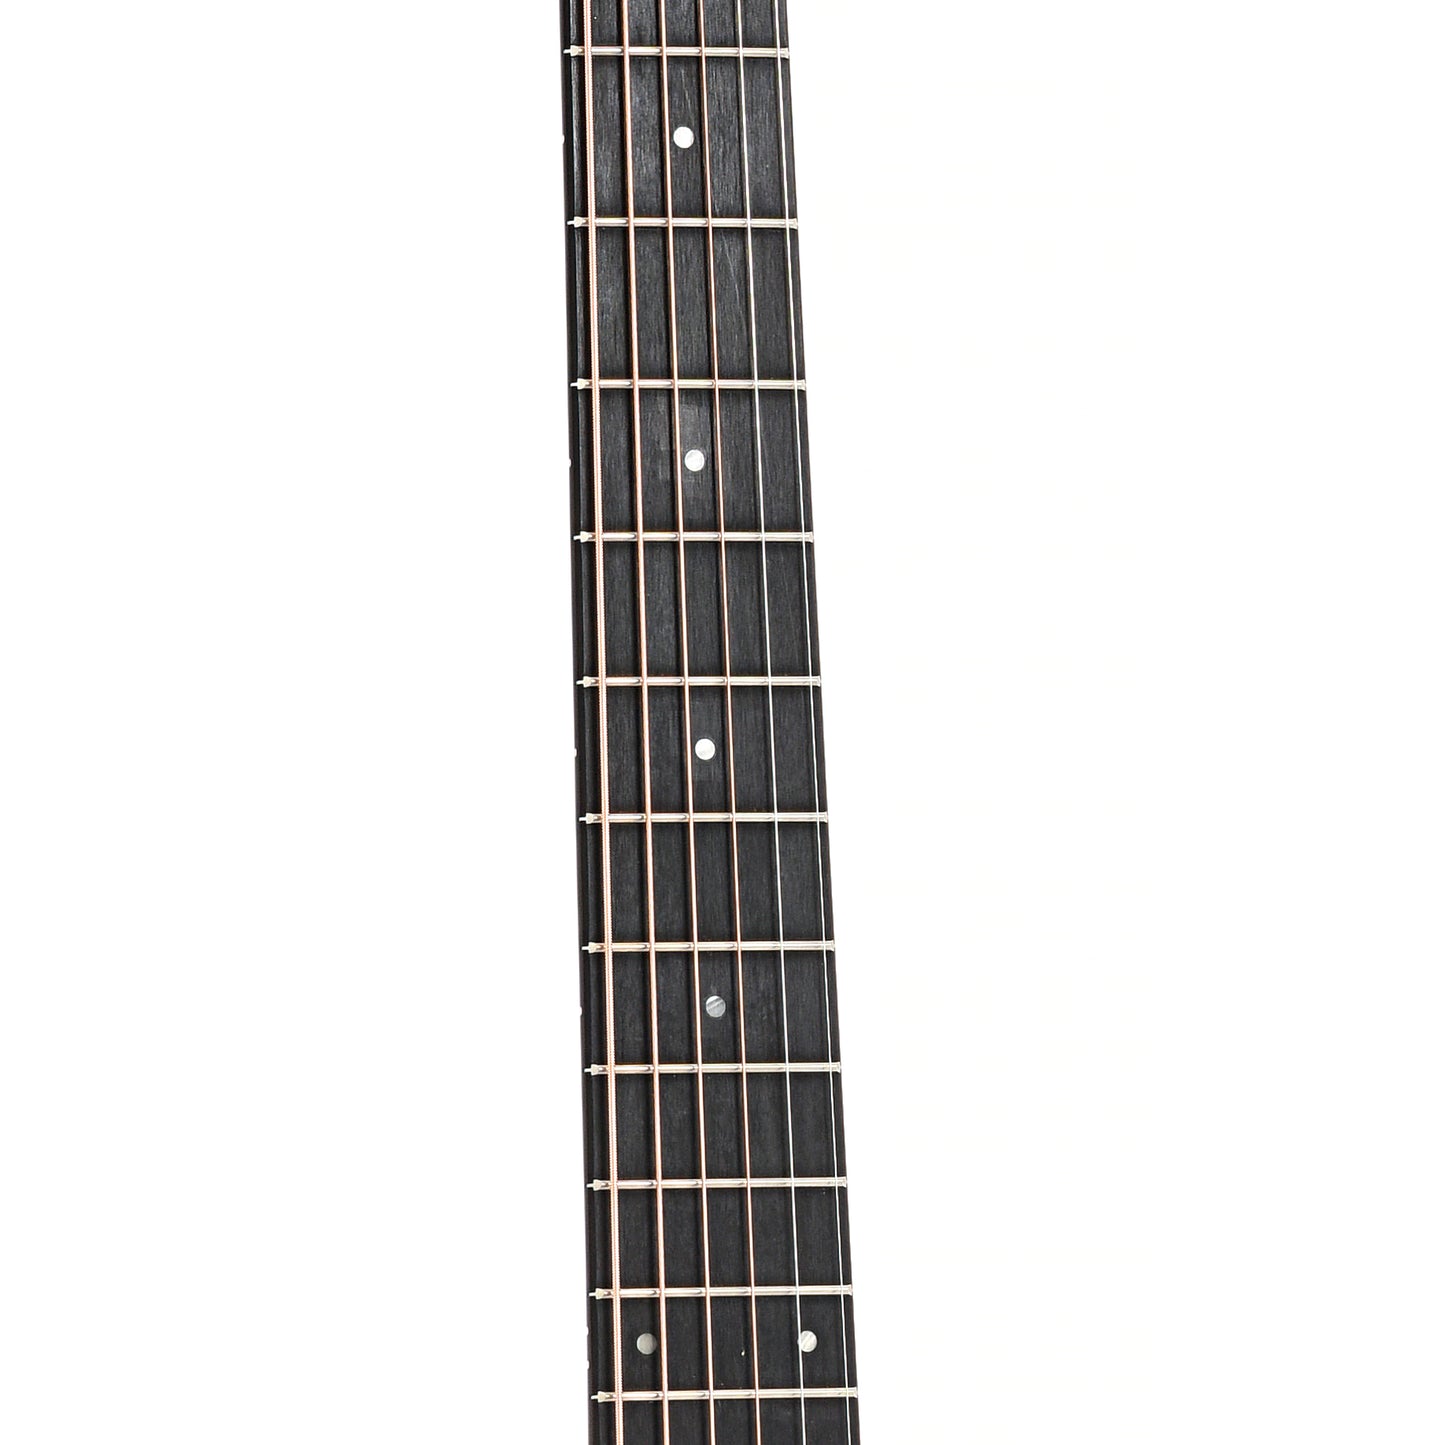 Fretboard of Taylor 214ce Acoustic Guitar